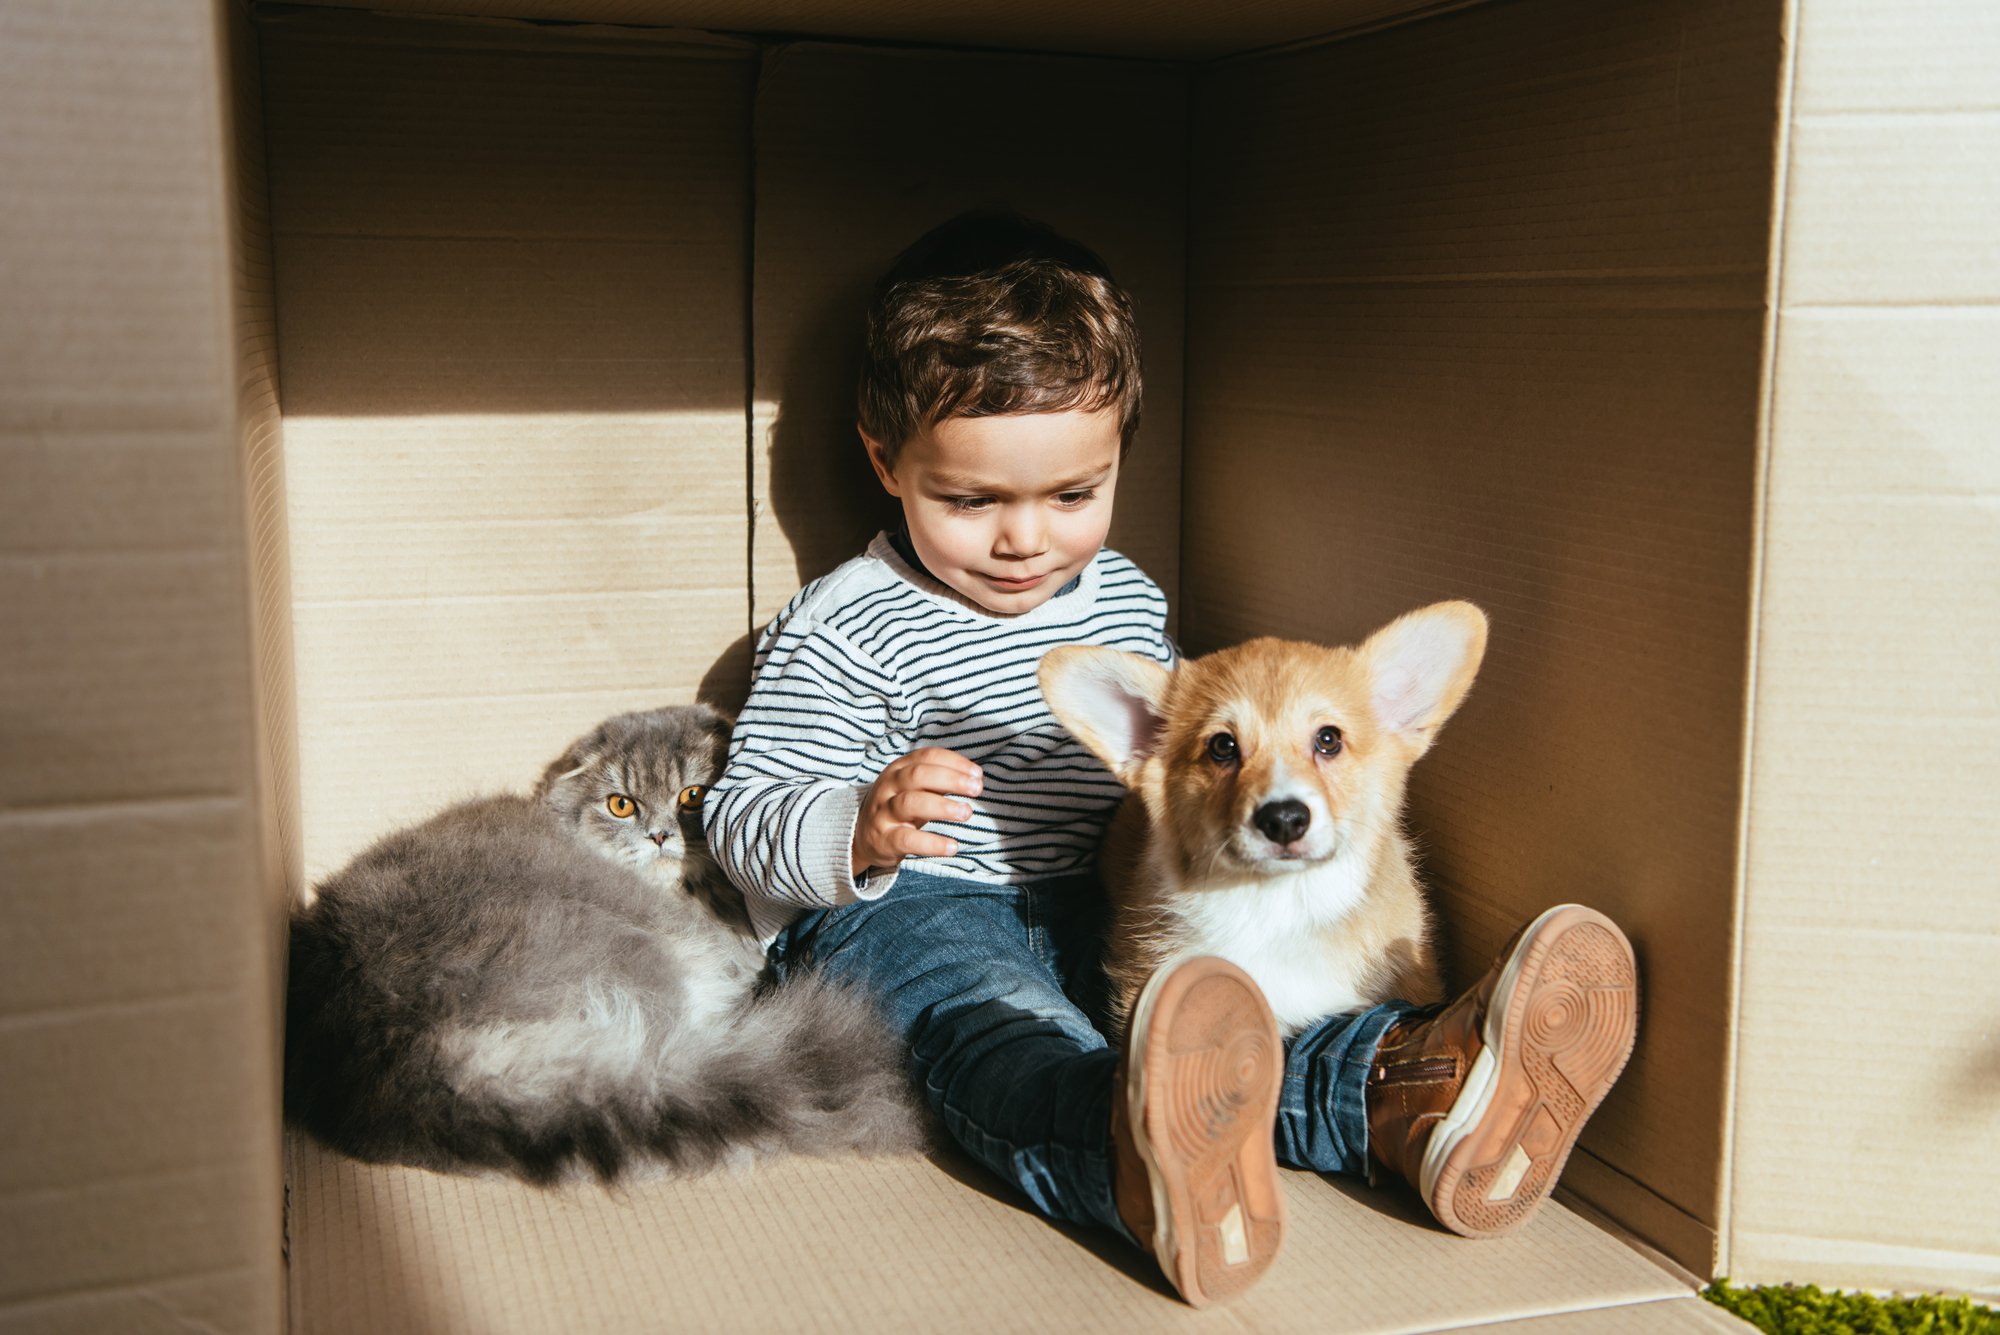 Little boy with cute cat and dog sitting in cardboard box under sunlight